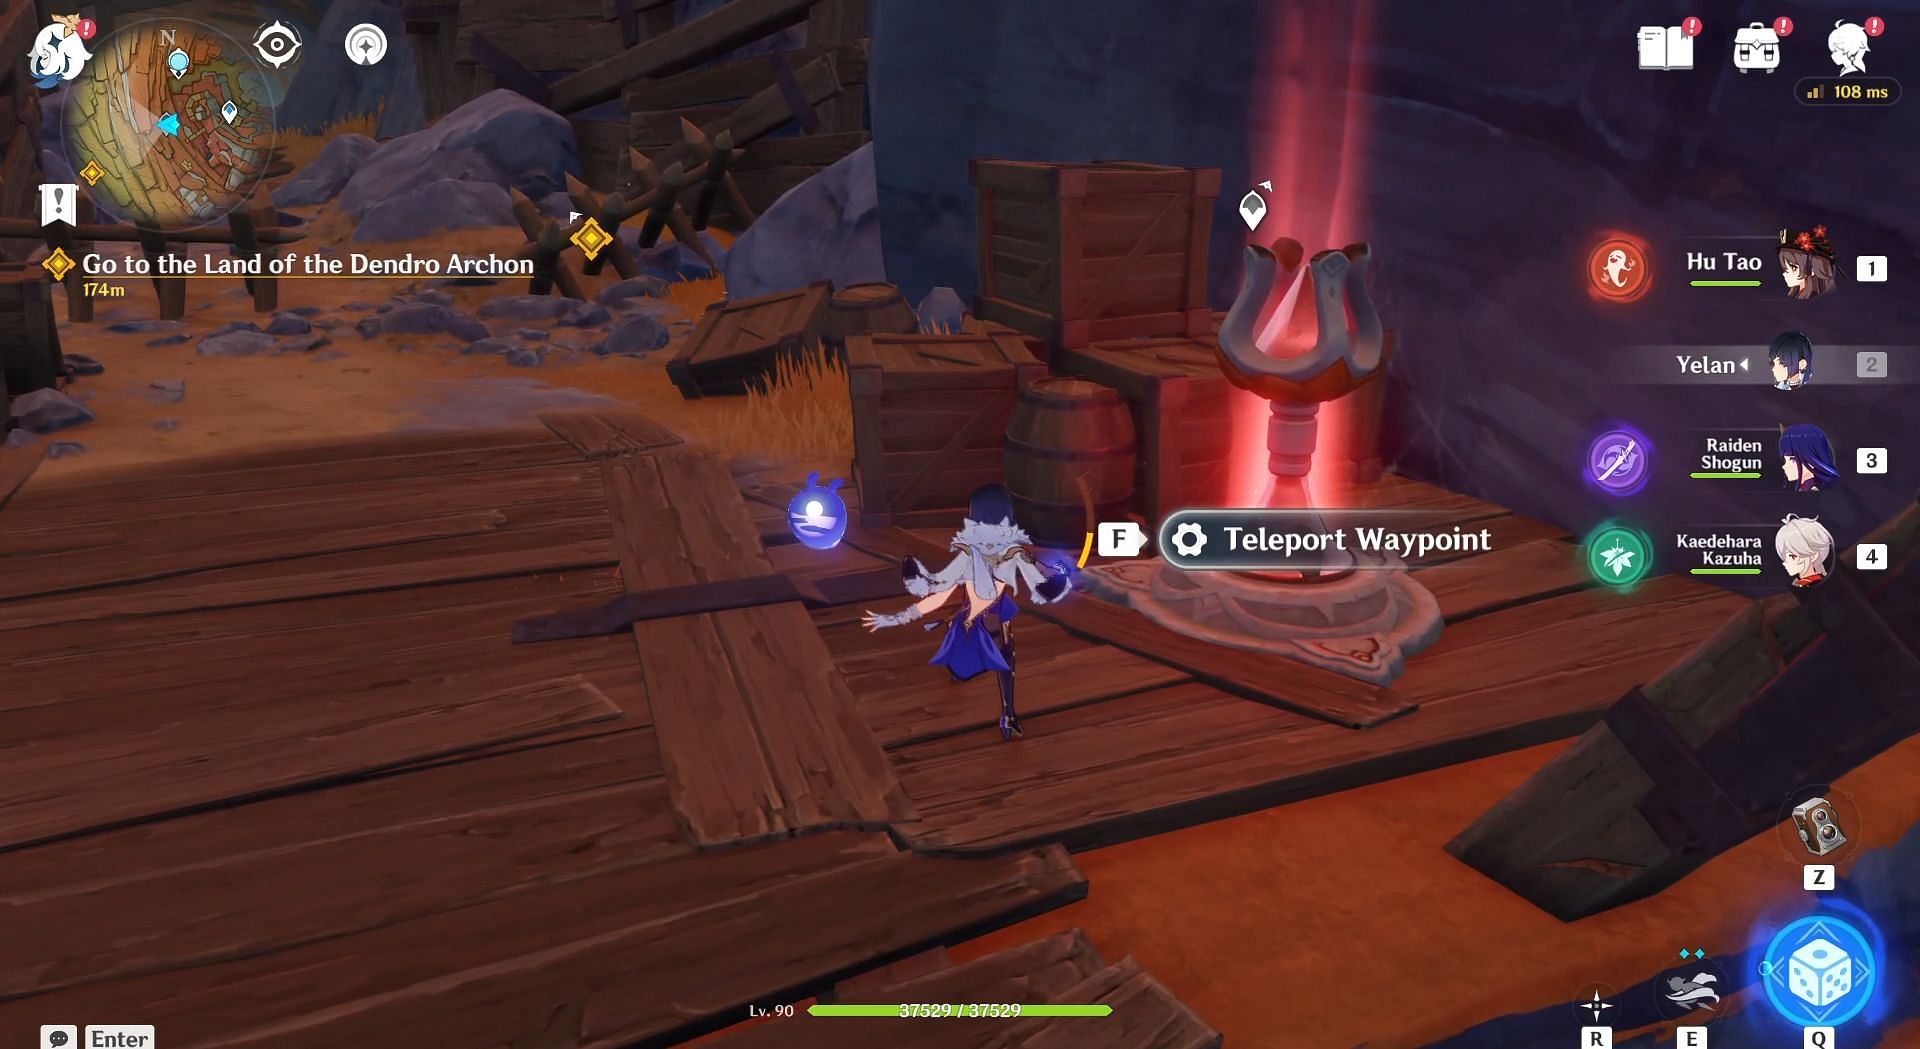 New teleport waypoint in The Chasm, Liyue (Image via HoYoverse)